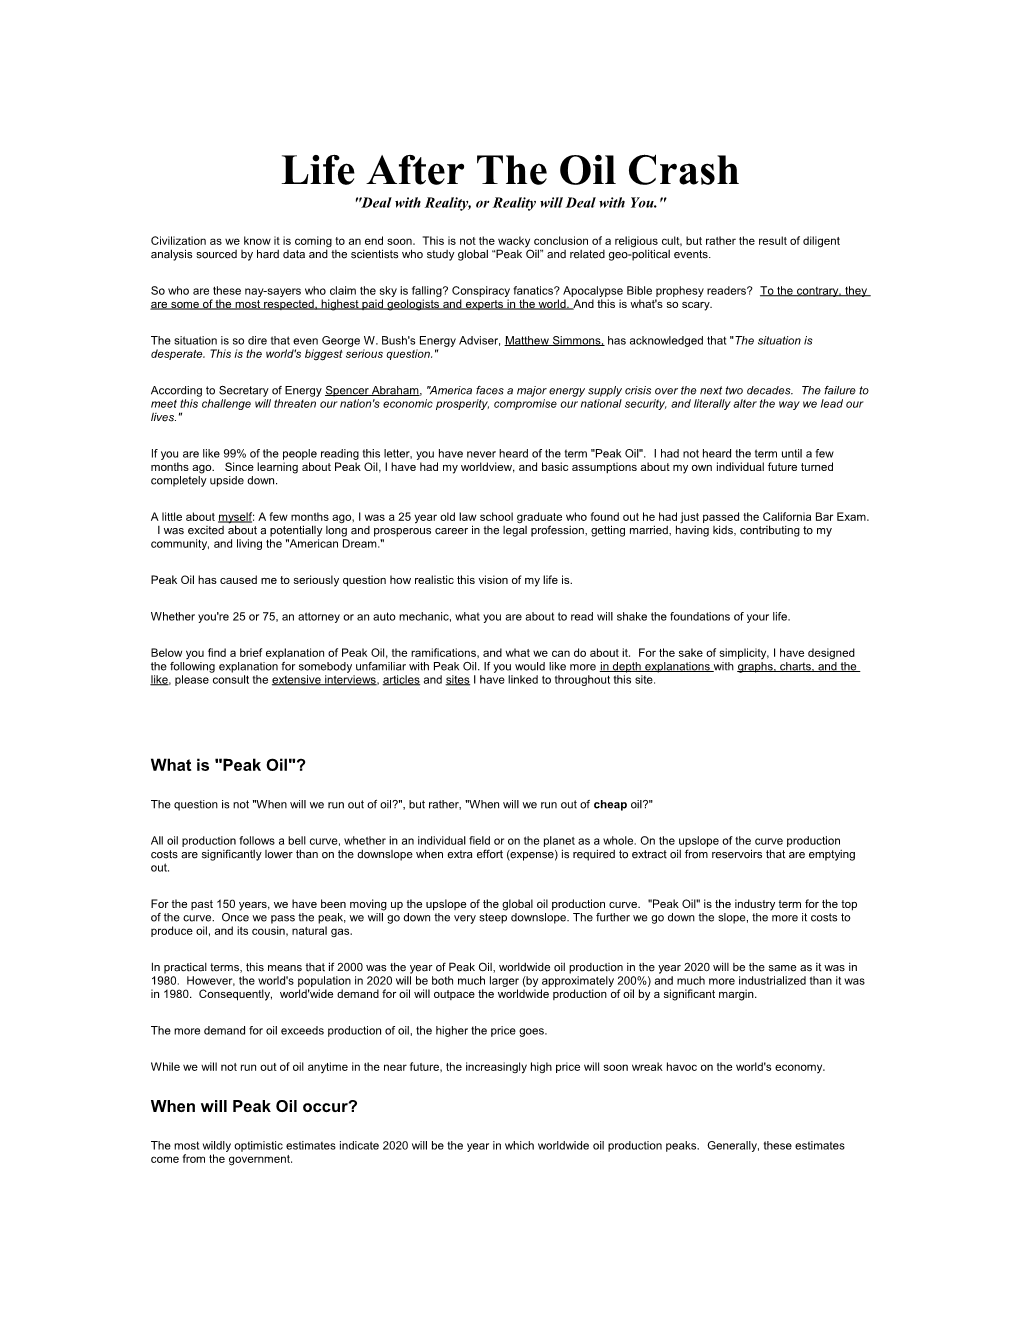 Life After the Oil Crash